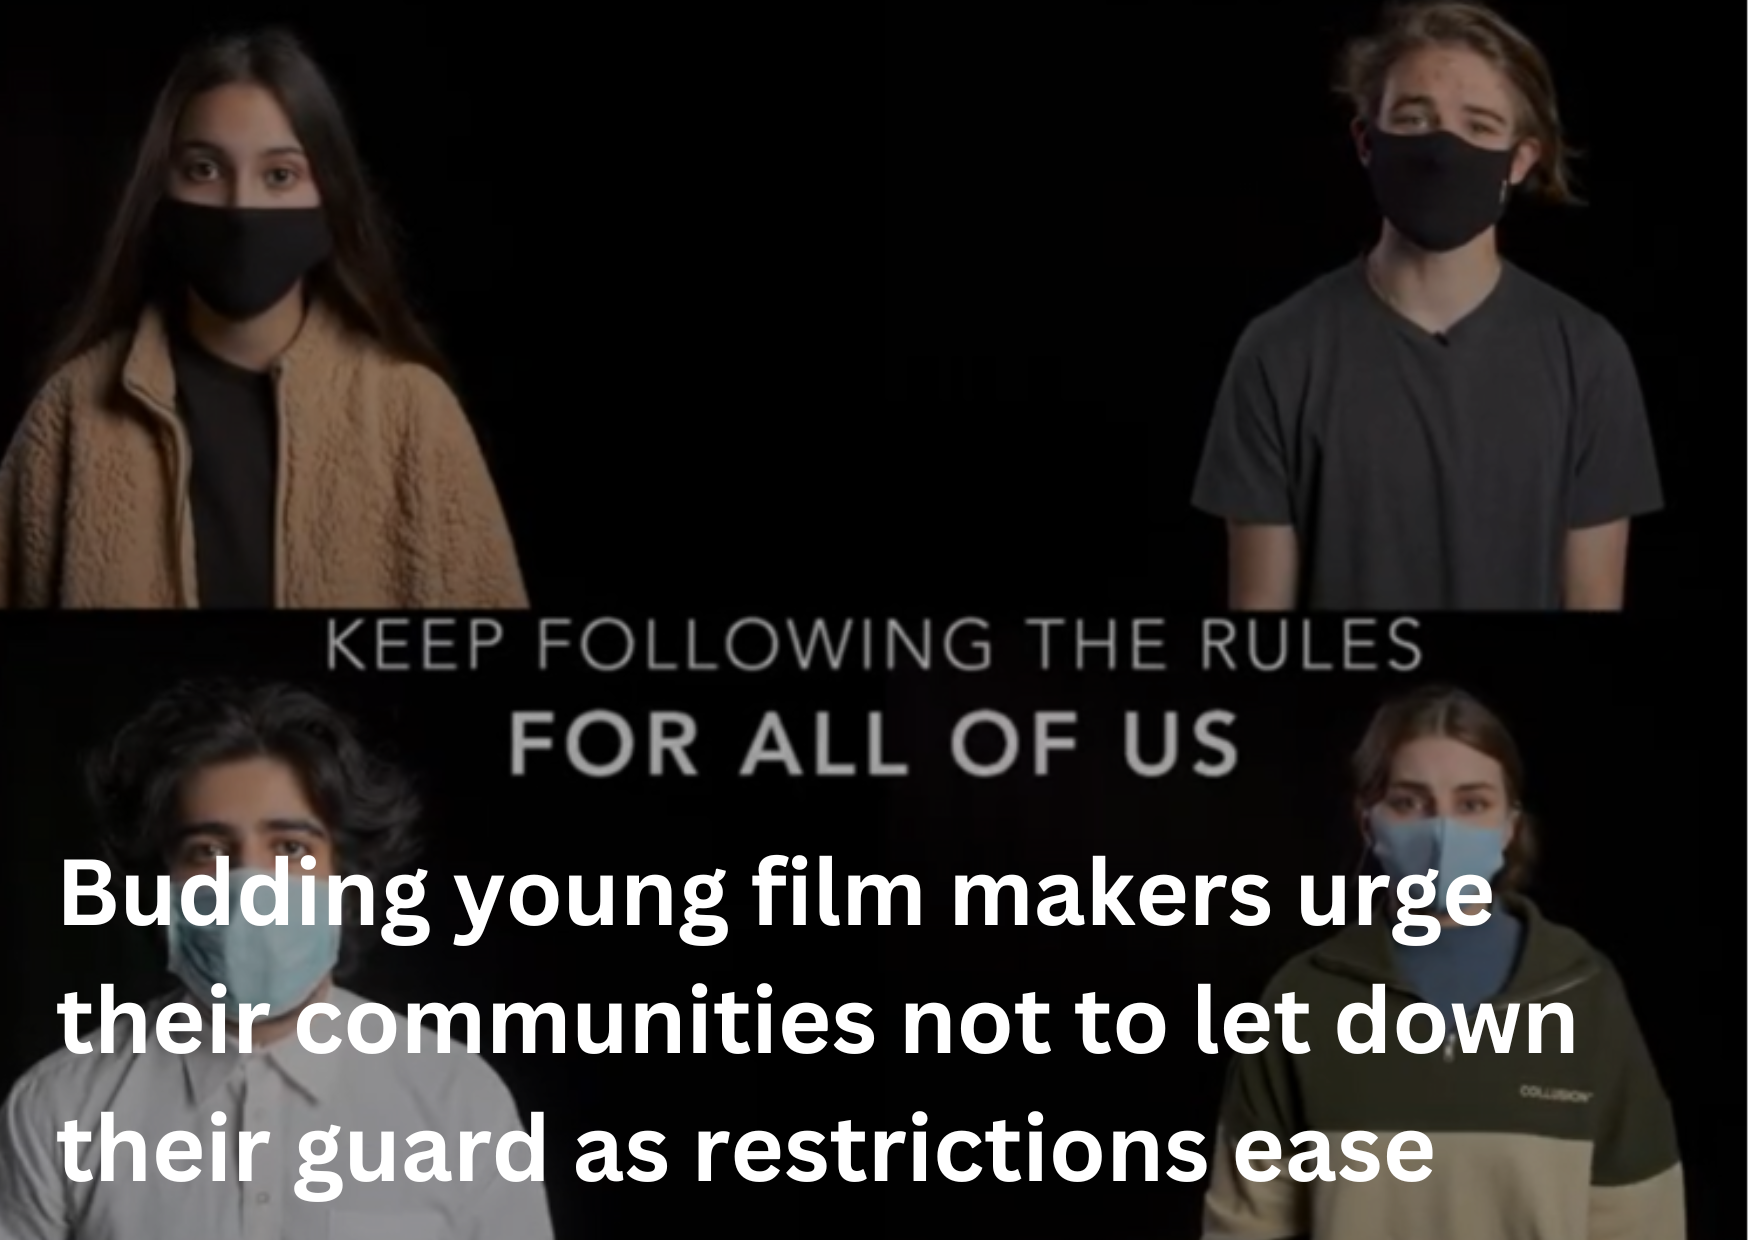 Budding young film makers urge their communities not to let down their guard as restrictions ease